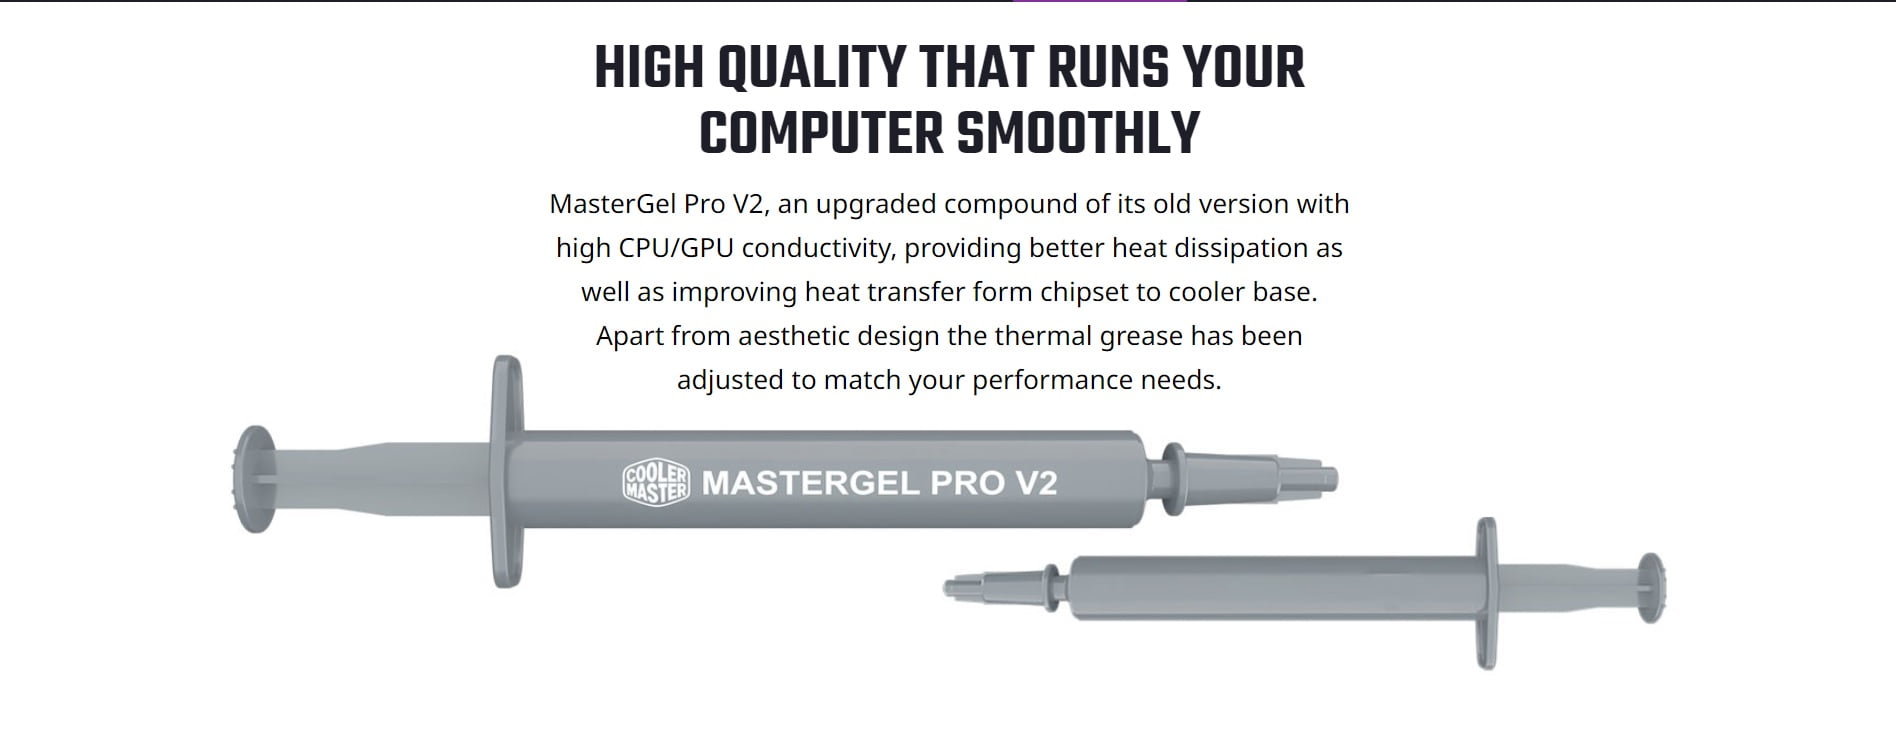 Cooler master MASTERGEL PRO V2 thermal paste { 9 (W/m-k) Thermal Conductivity - 1.5ml Volume } MGY-ZOSG-N15M-R3